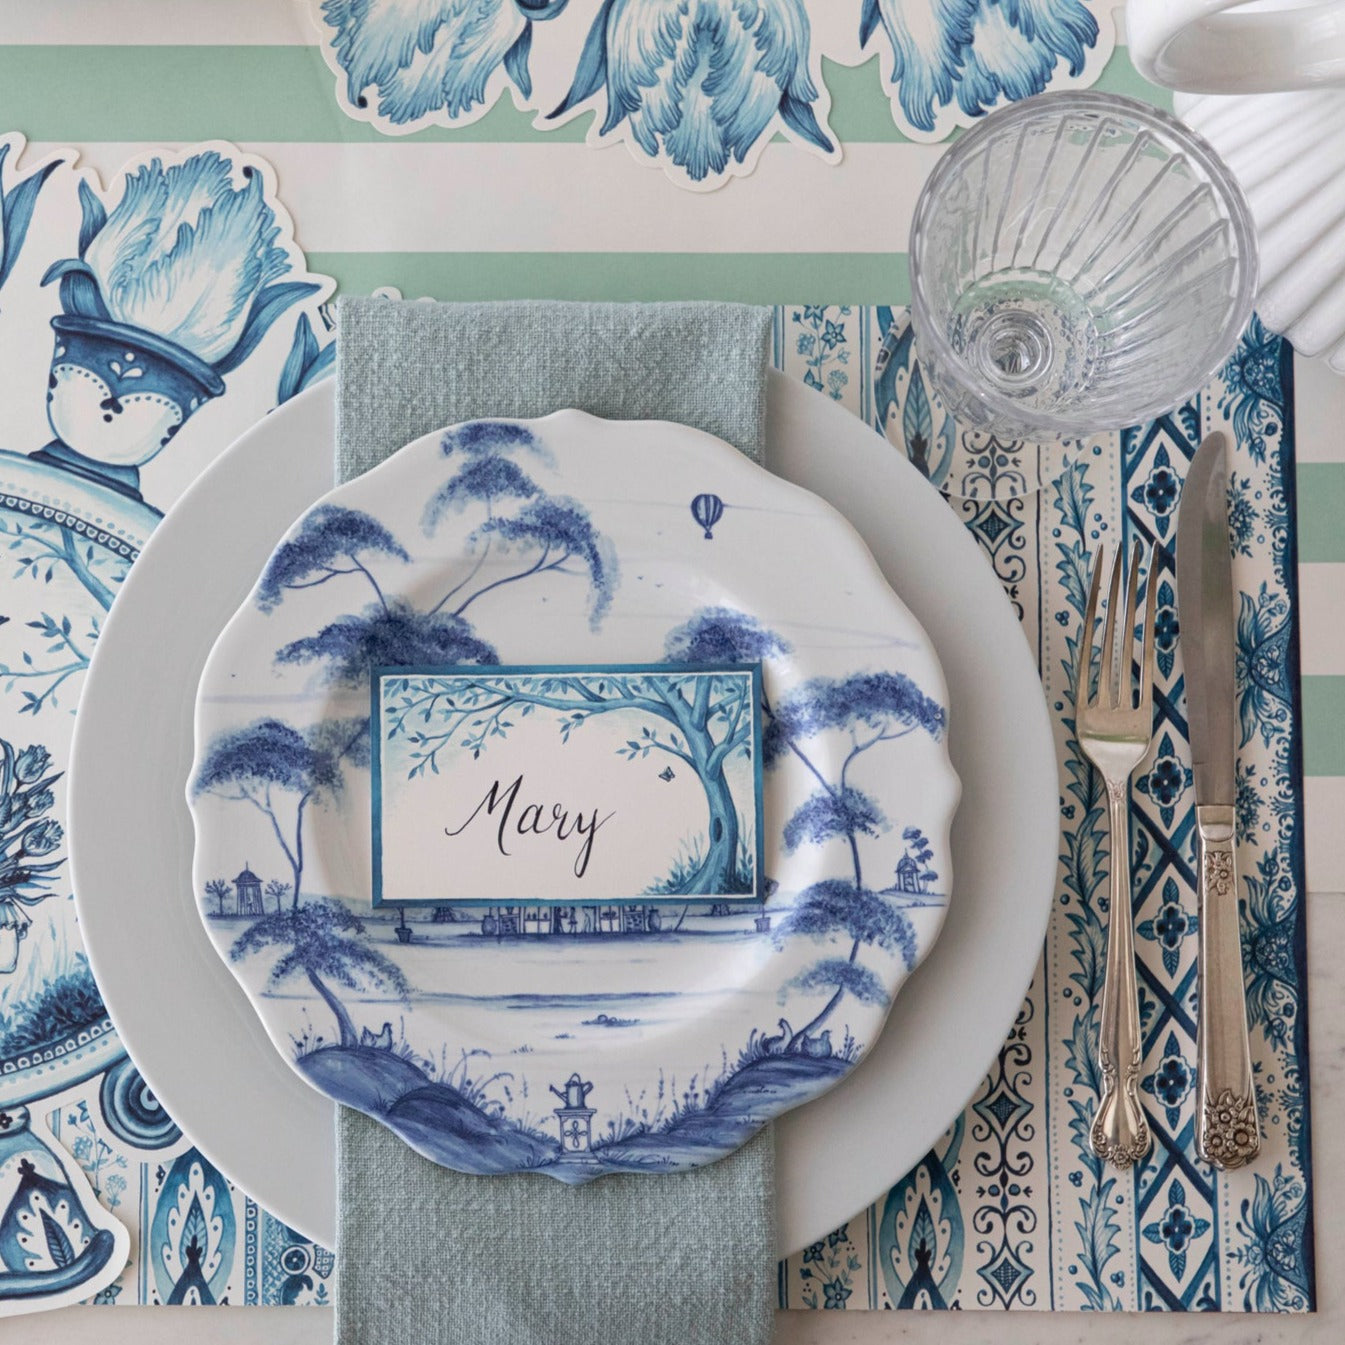 The Indigo Chintz Placemat under an elegant place setting, from above.